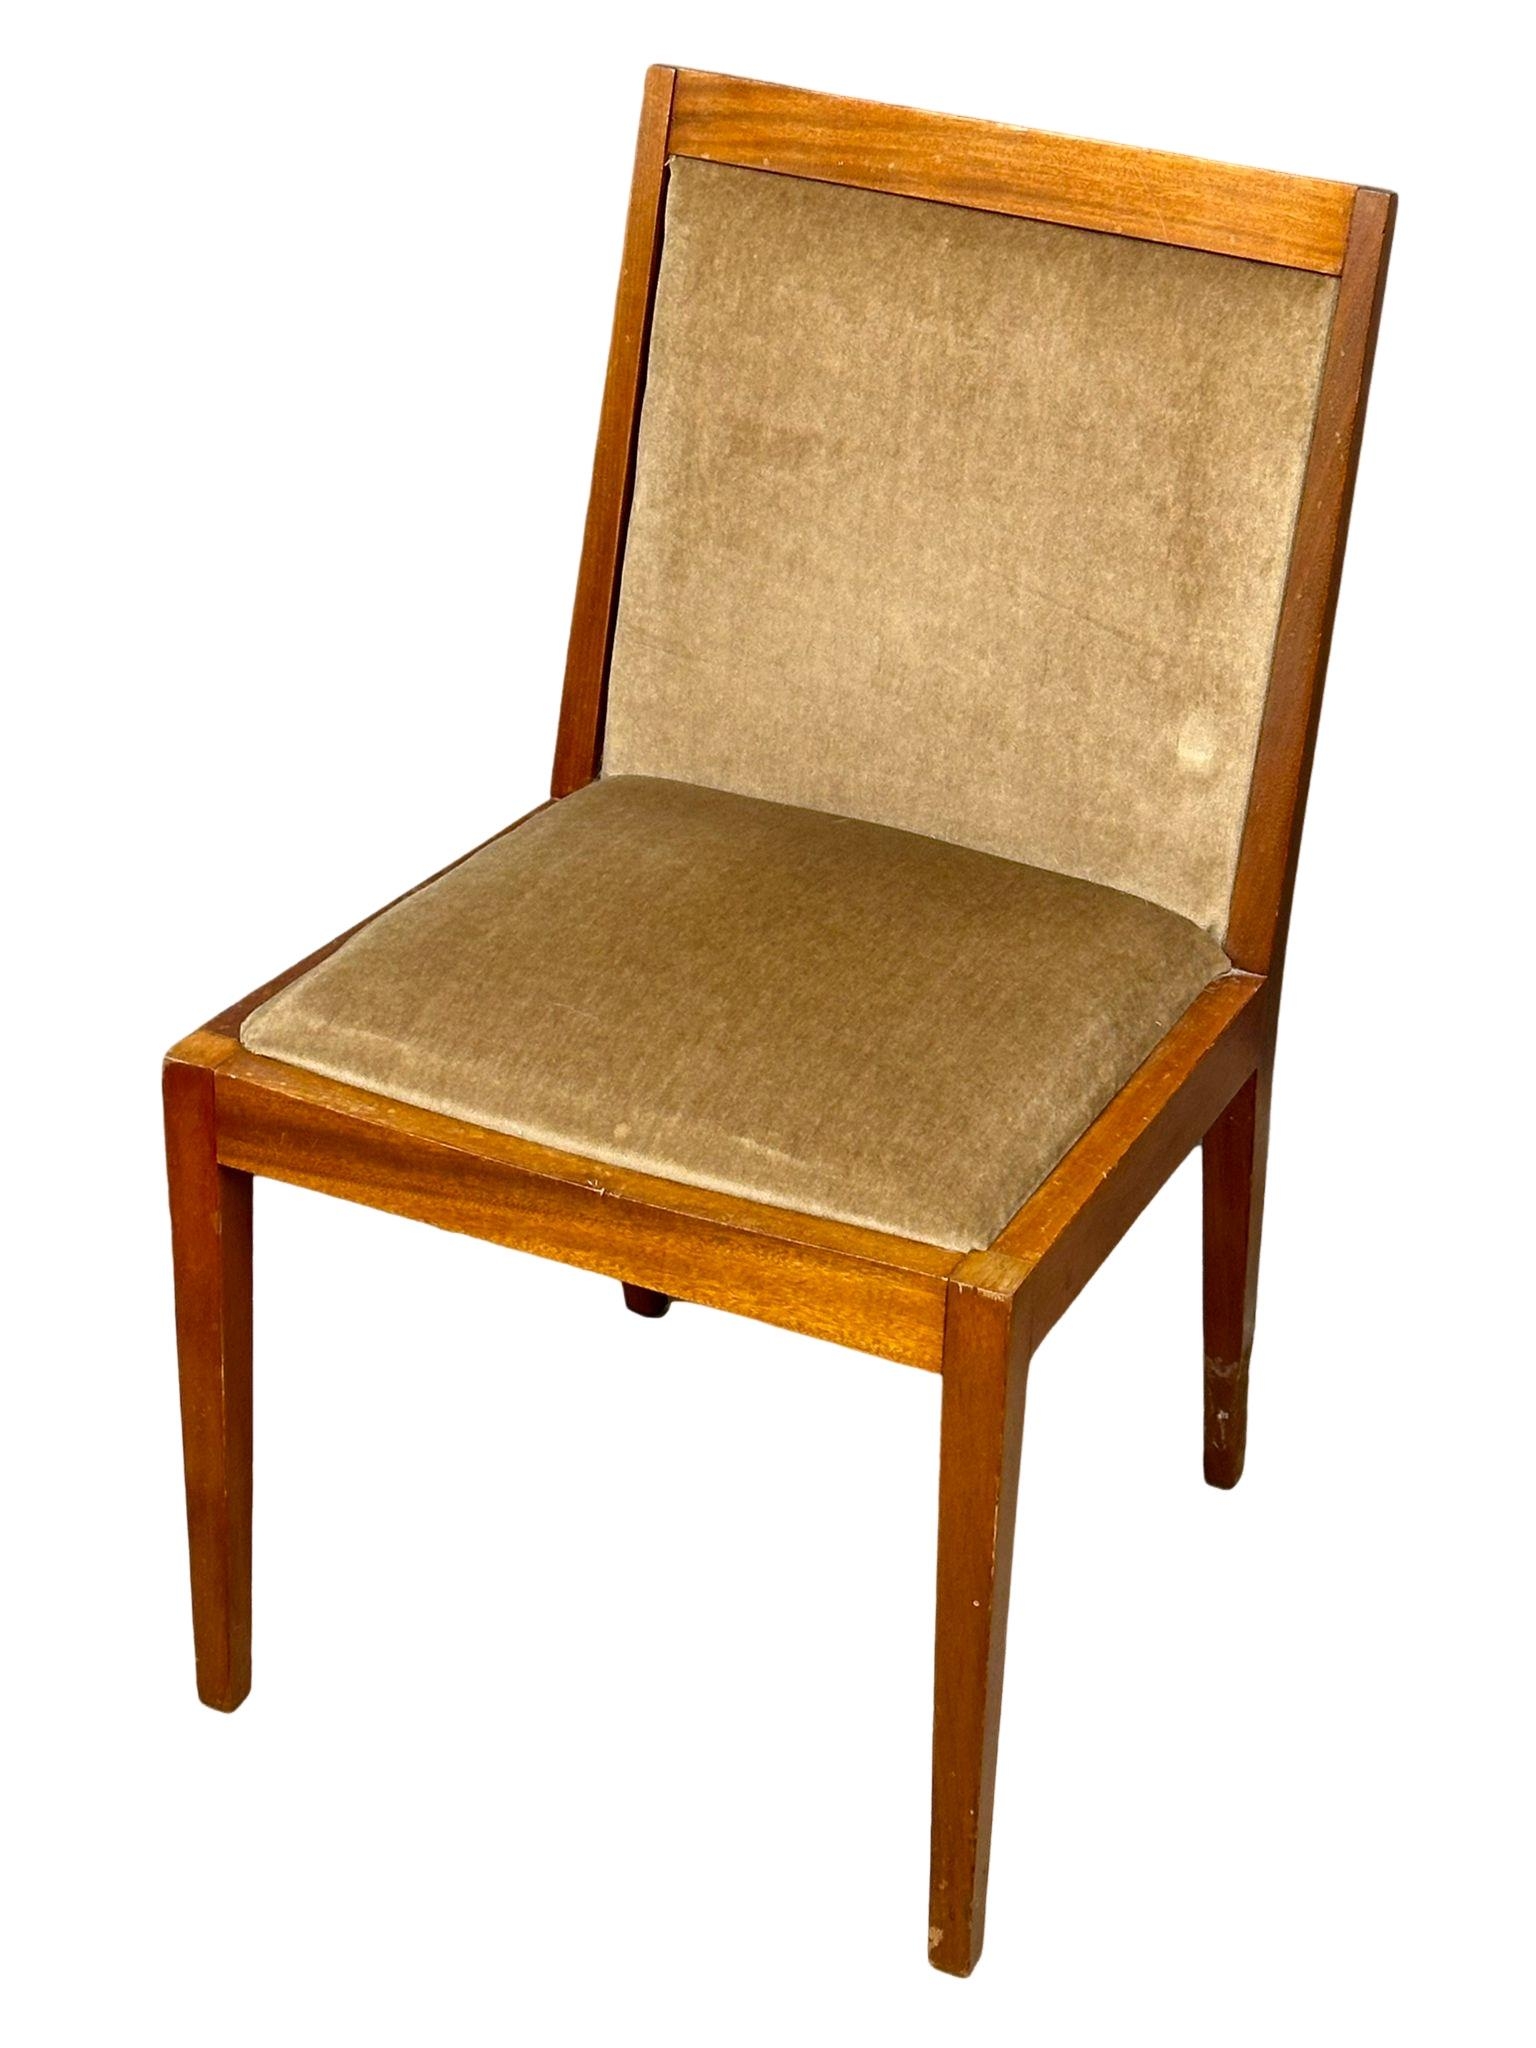 A set of 4 Mid Century teak dining chairs.(1) - Image 6 of 6